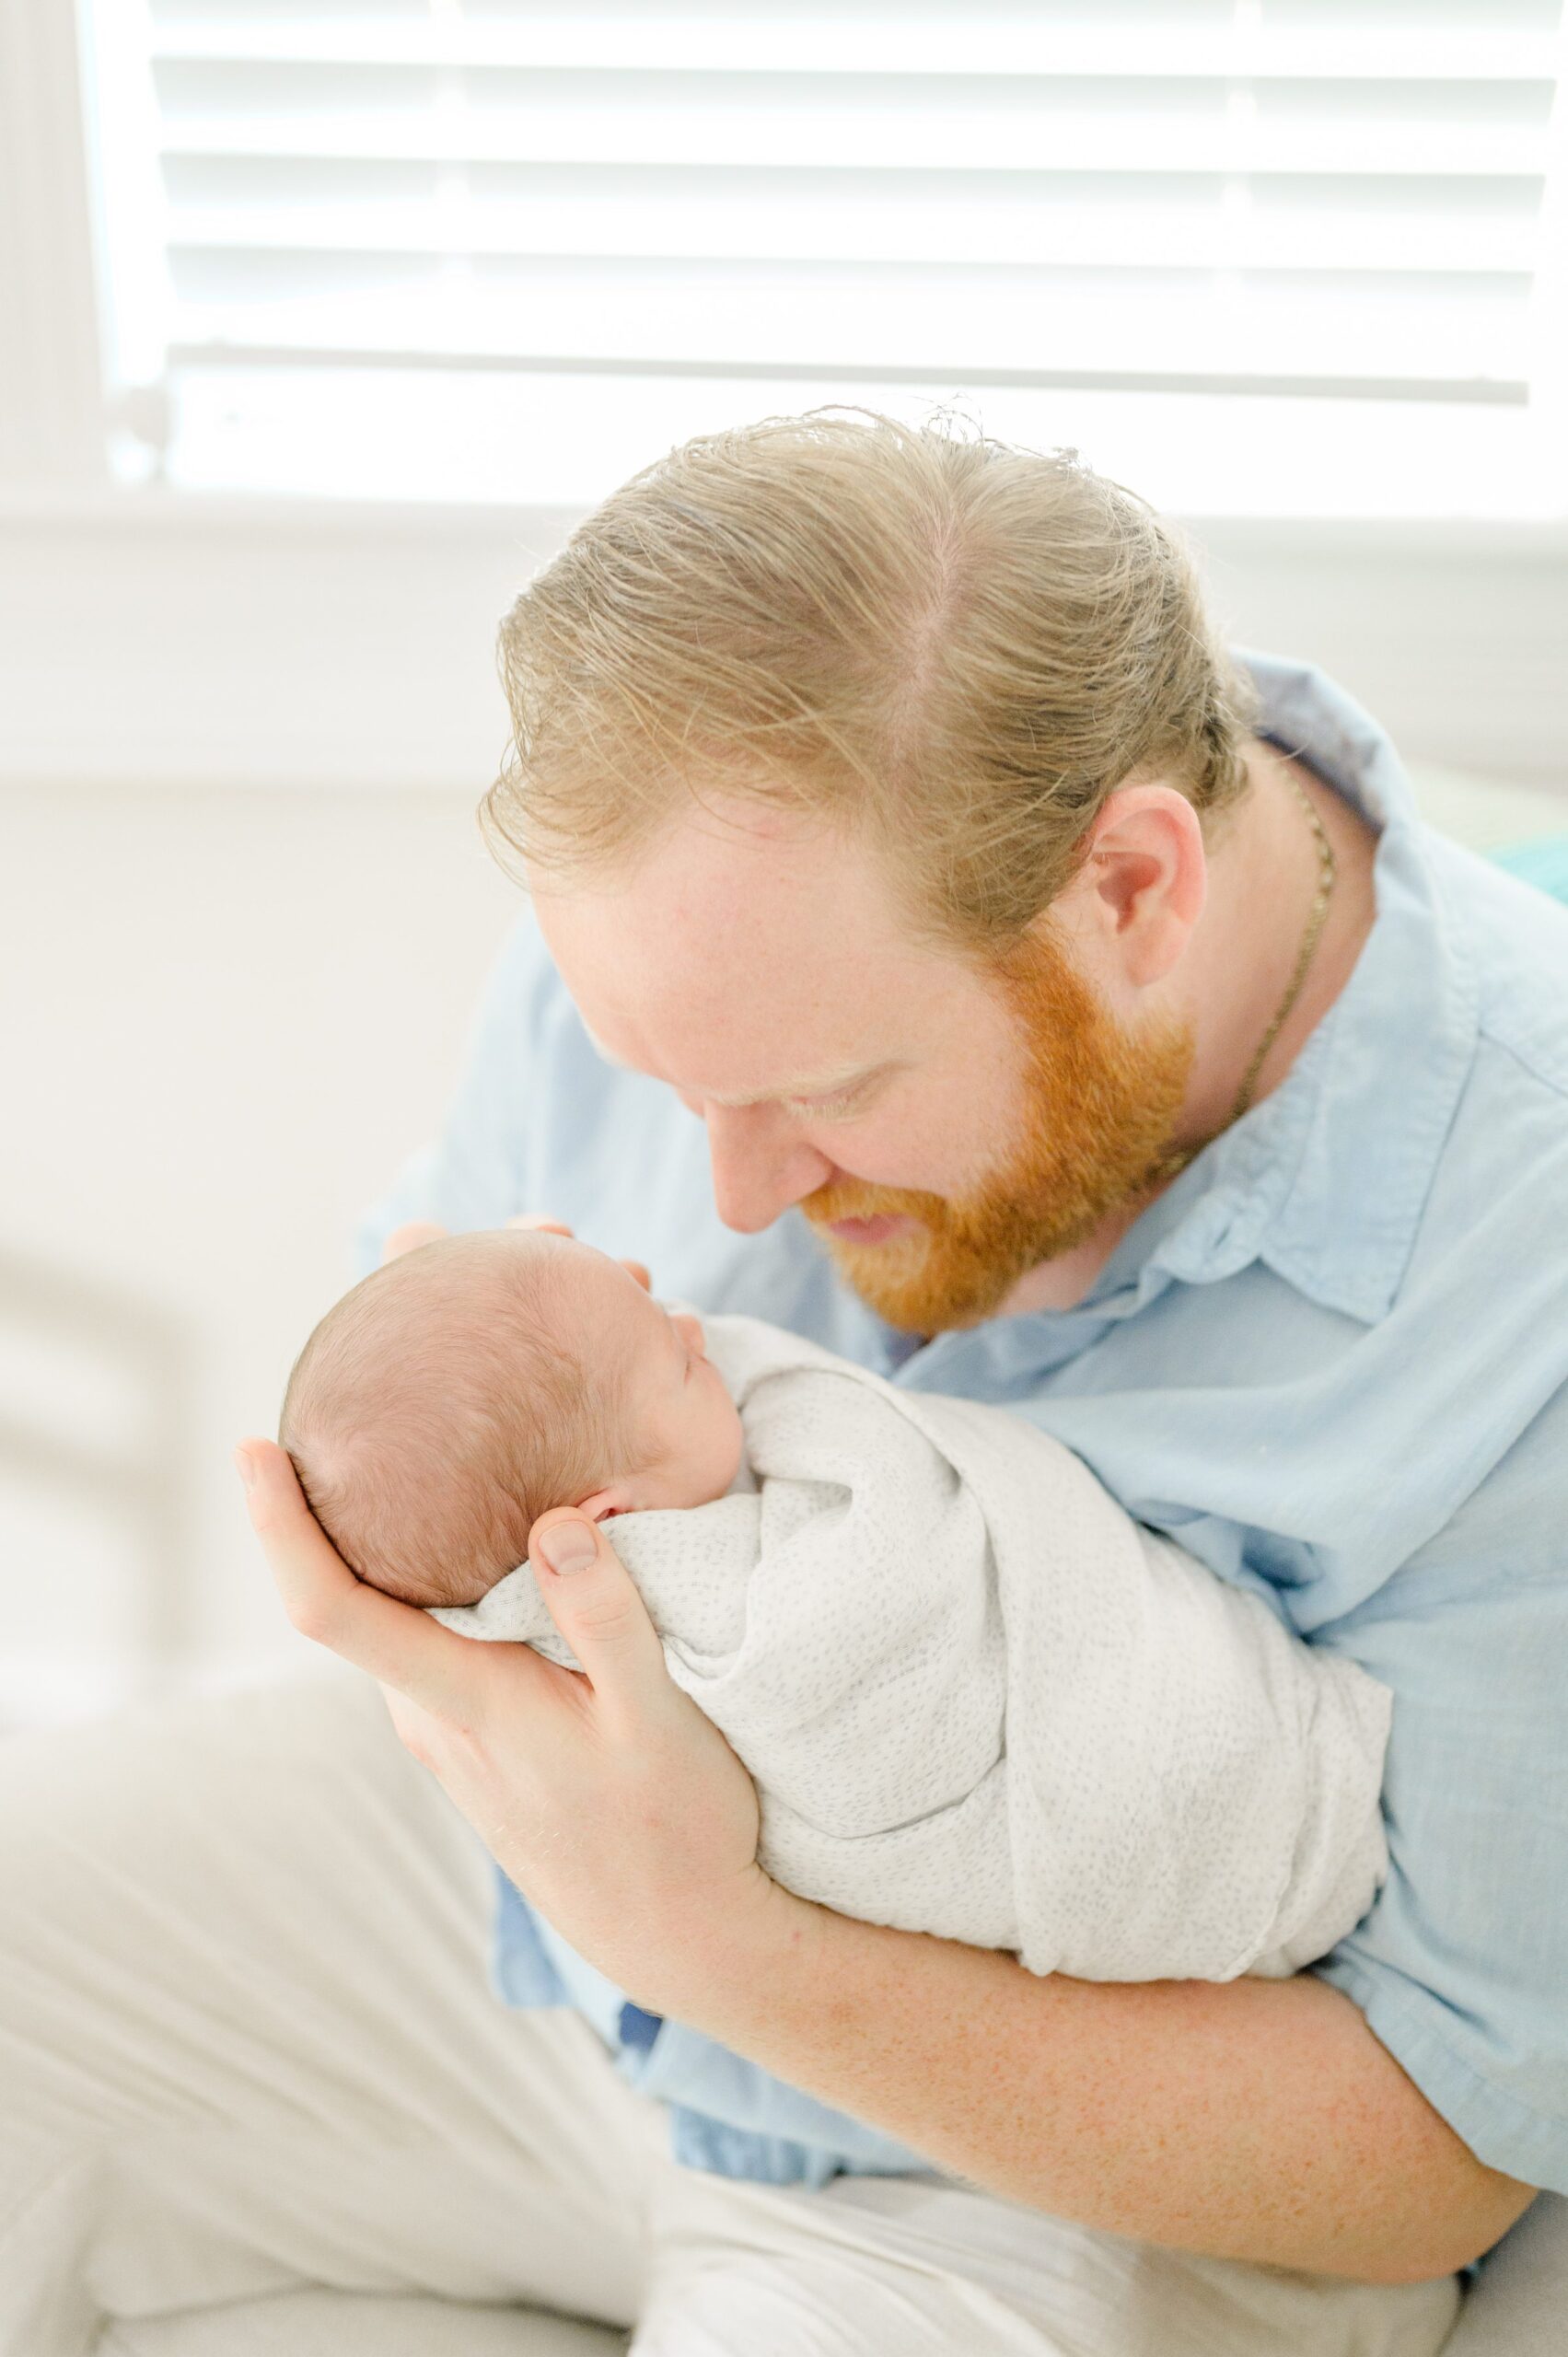 In home newborn session in Washington, DC photographed by Baltimore lifestyle newborn photographer Cait Kramer.